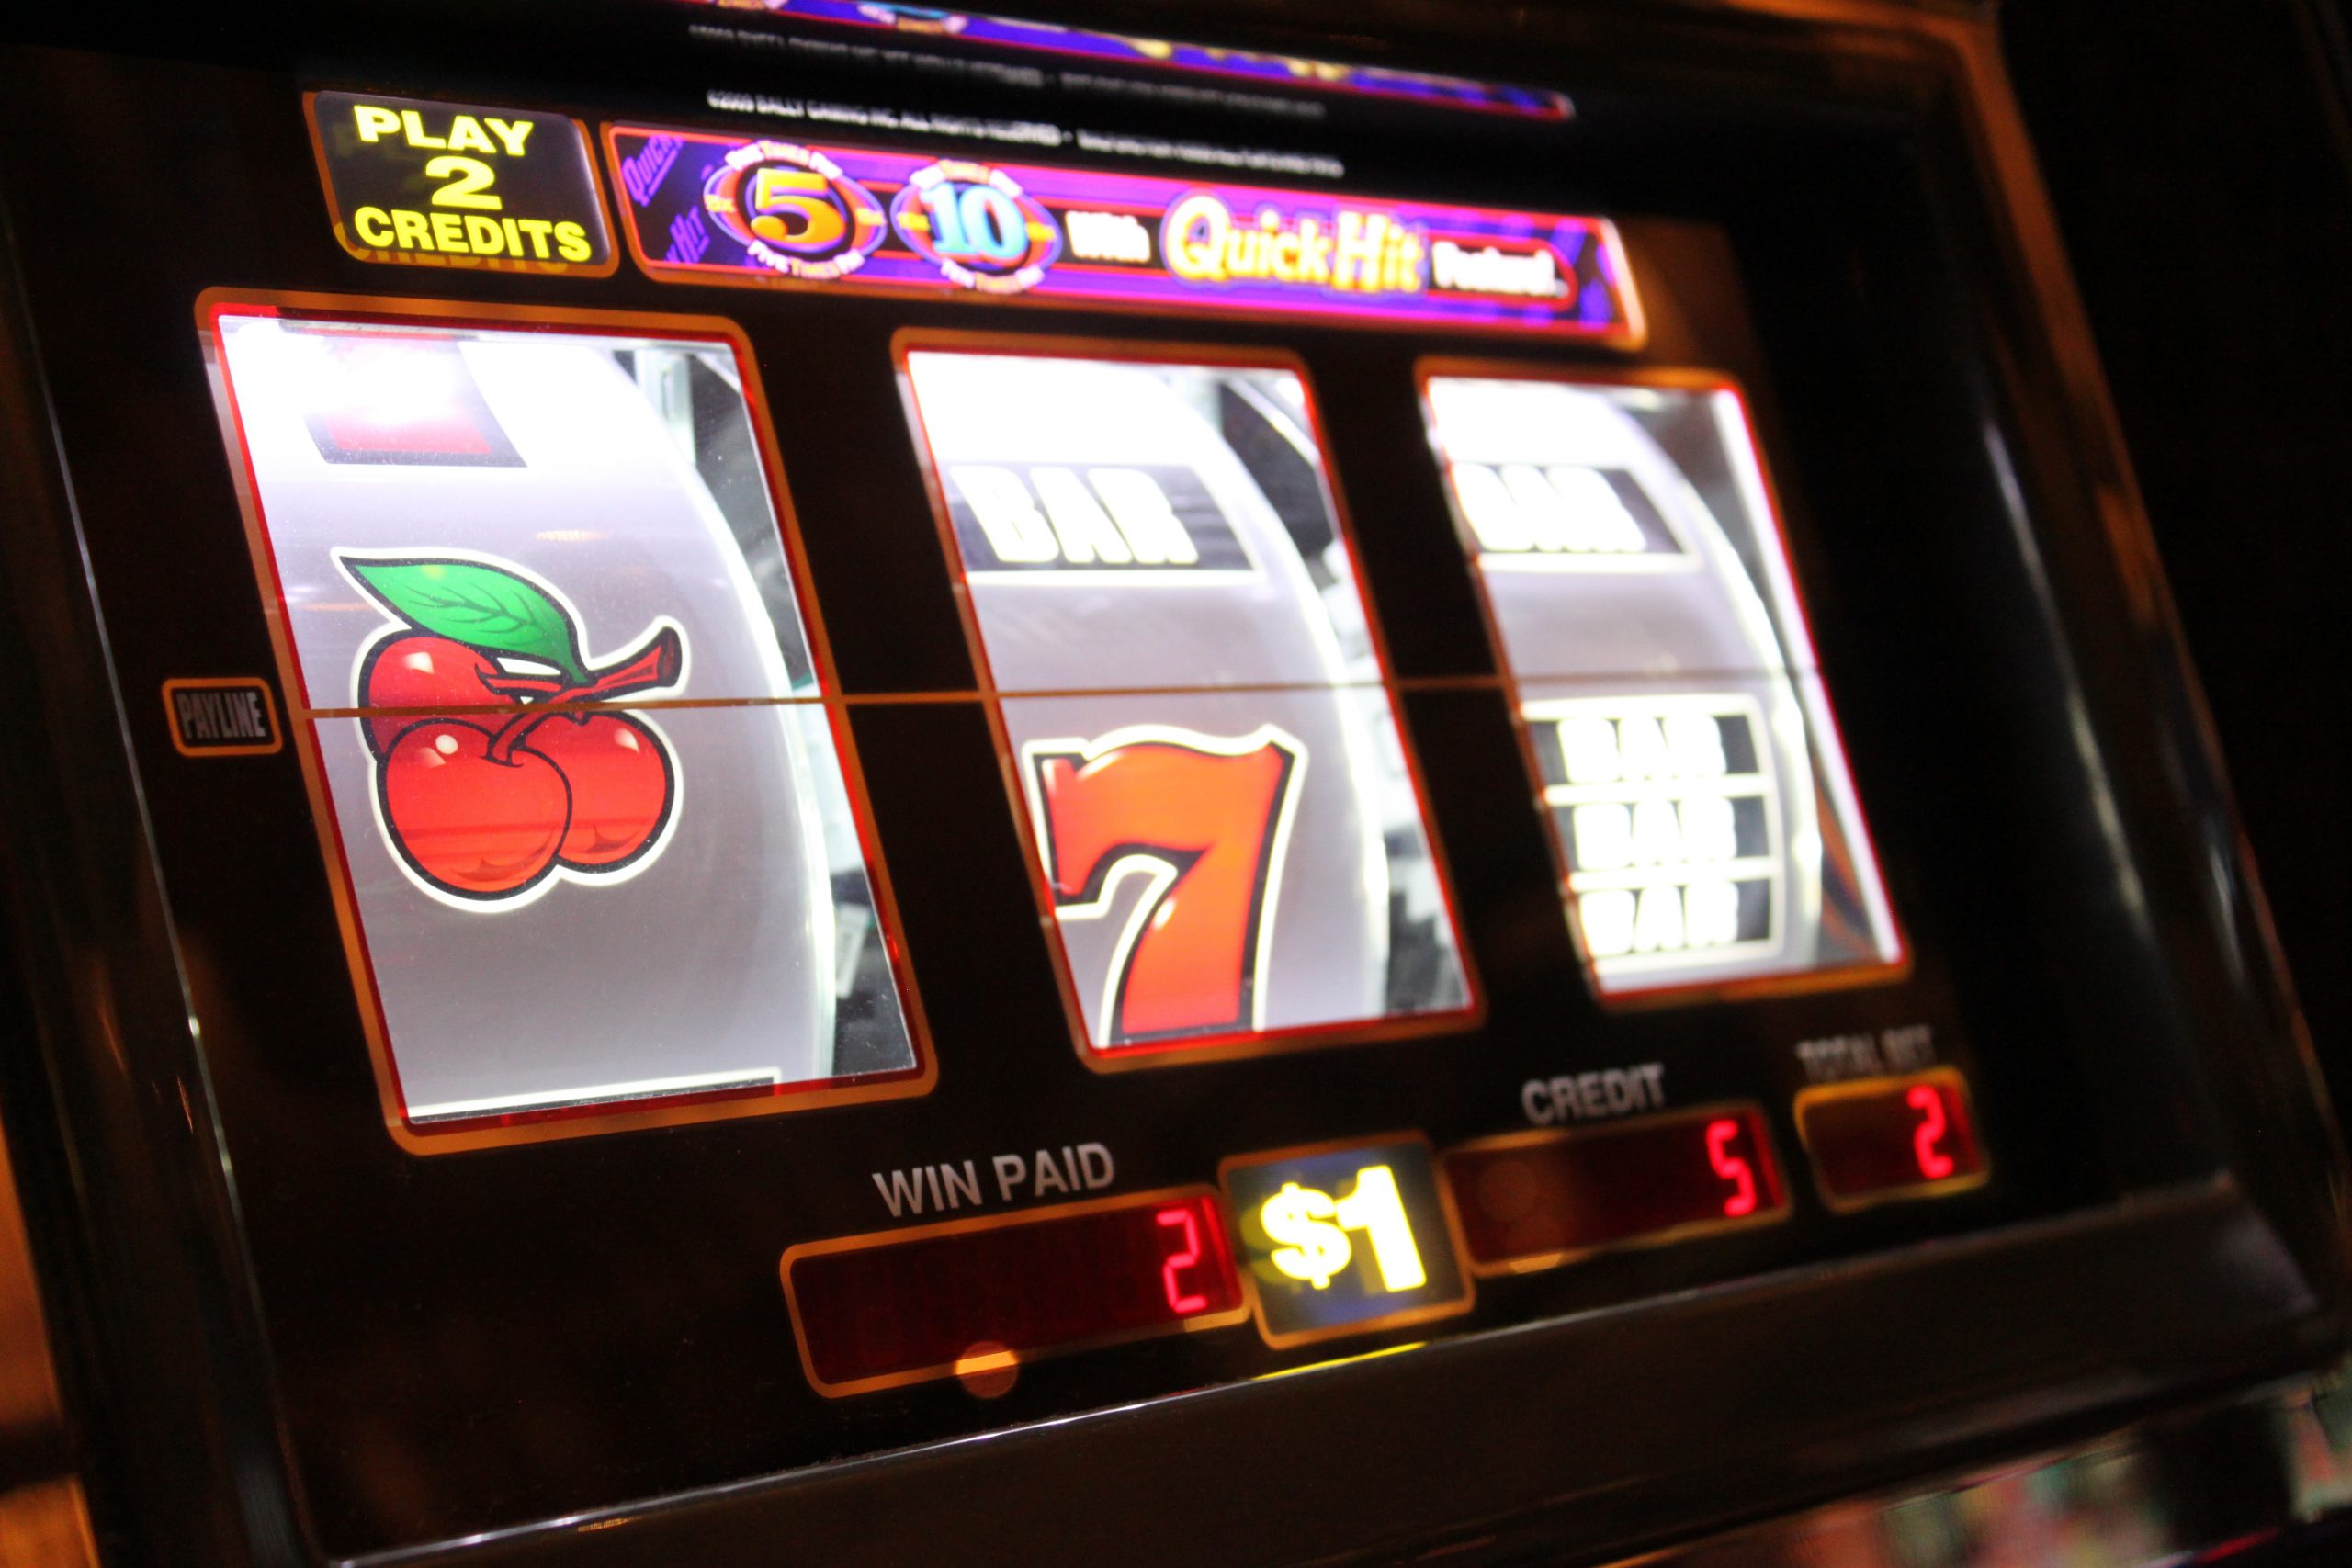 Are video slots different from traditional slots?